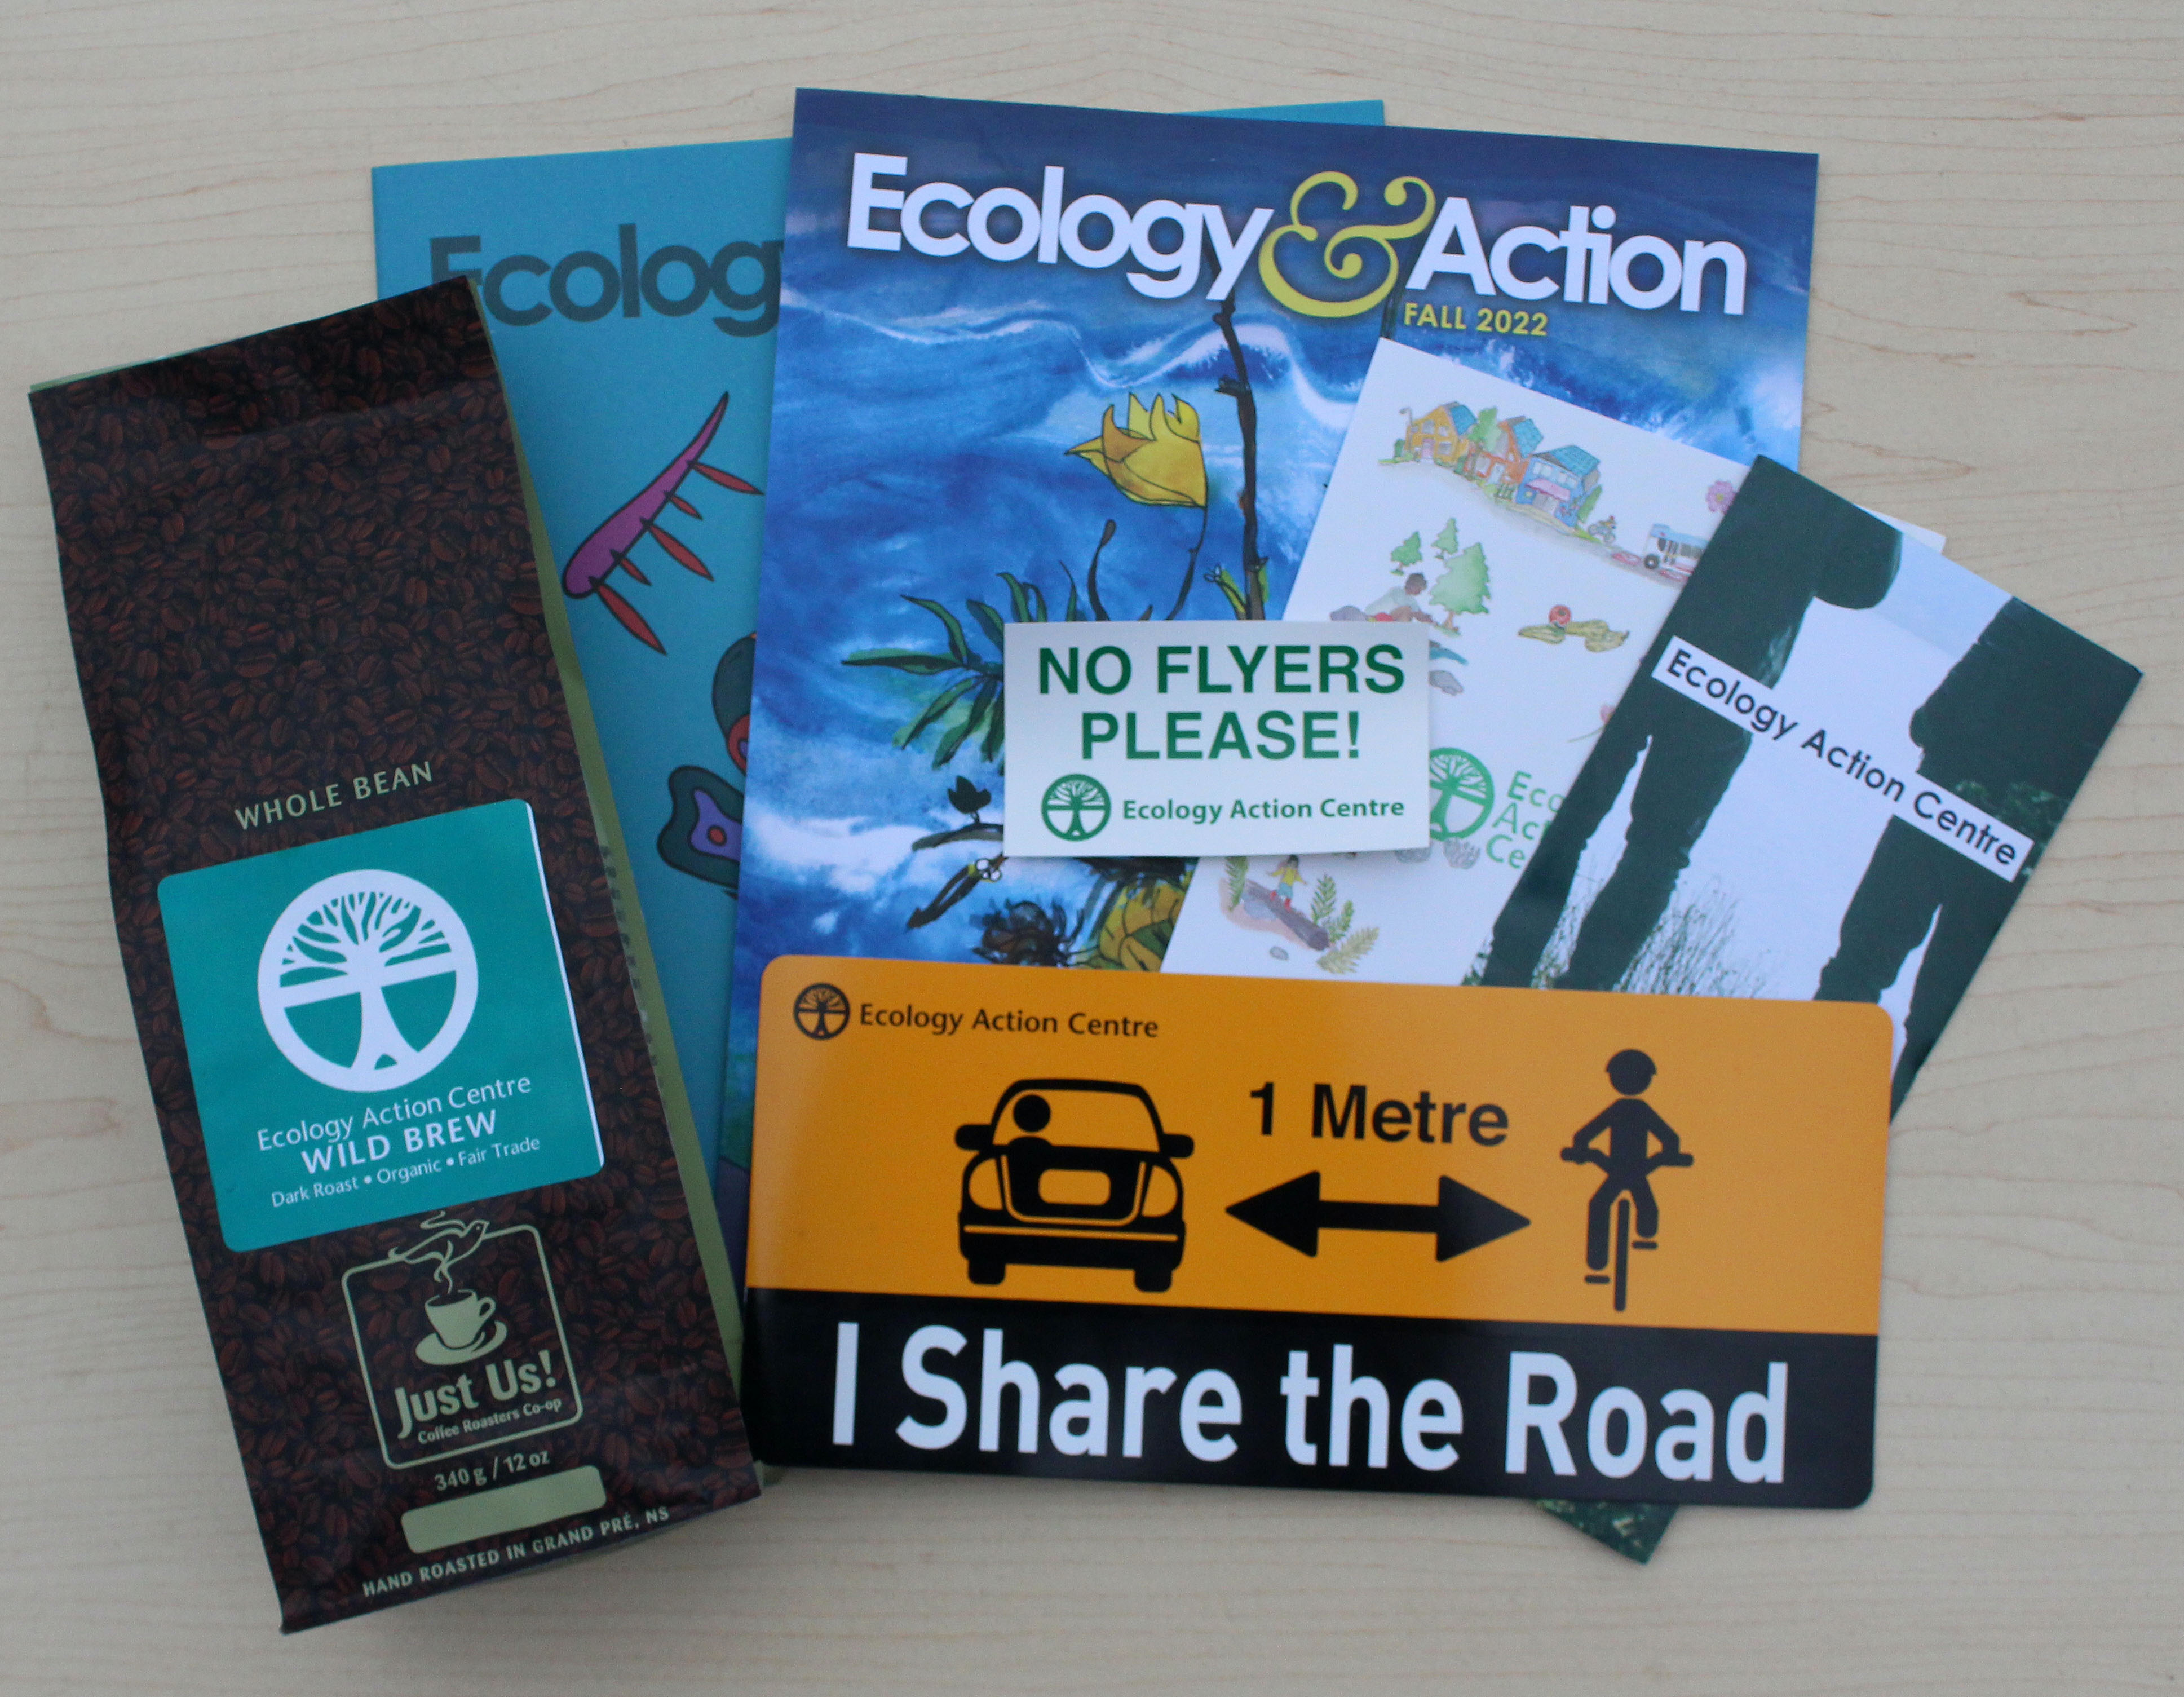 a bag of coffee, a brochure, two ecology action magazines, a no flyers sticker, a I share the road car magnet and a card laid out on a desk.